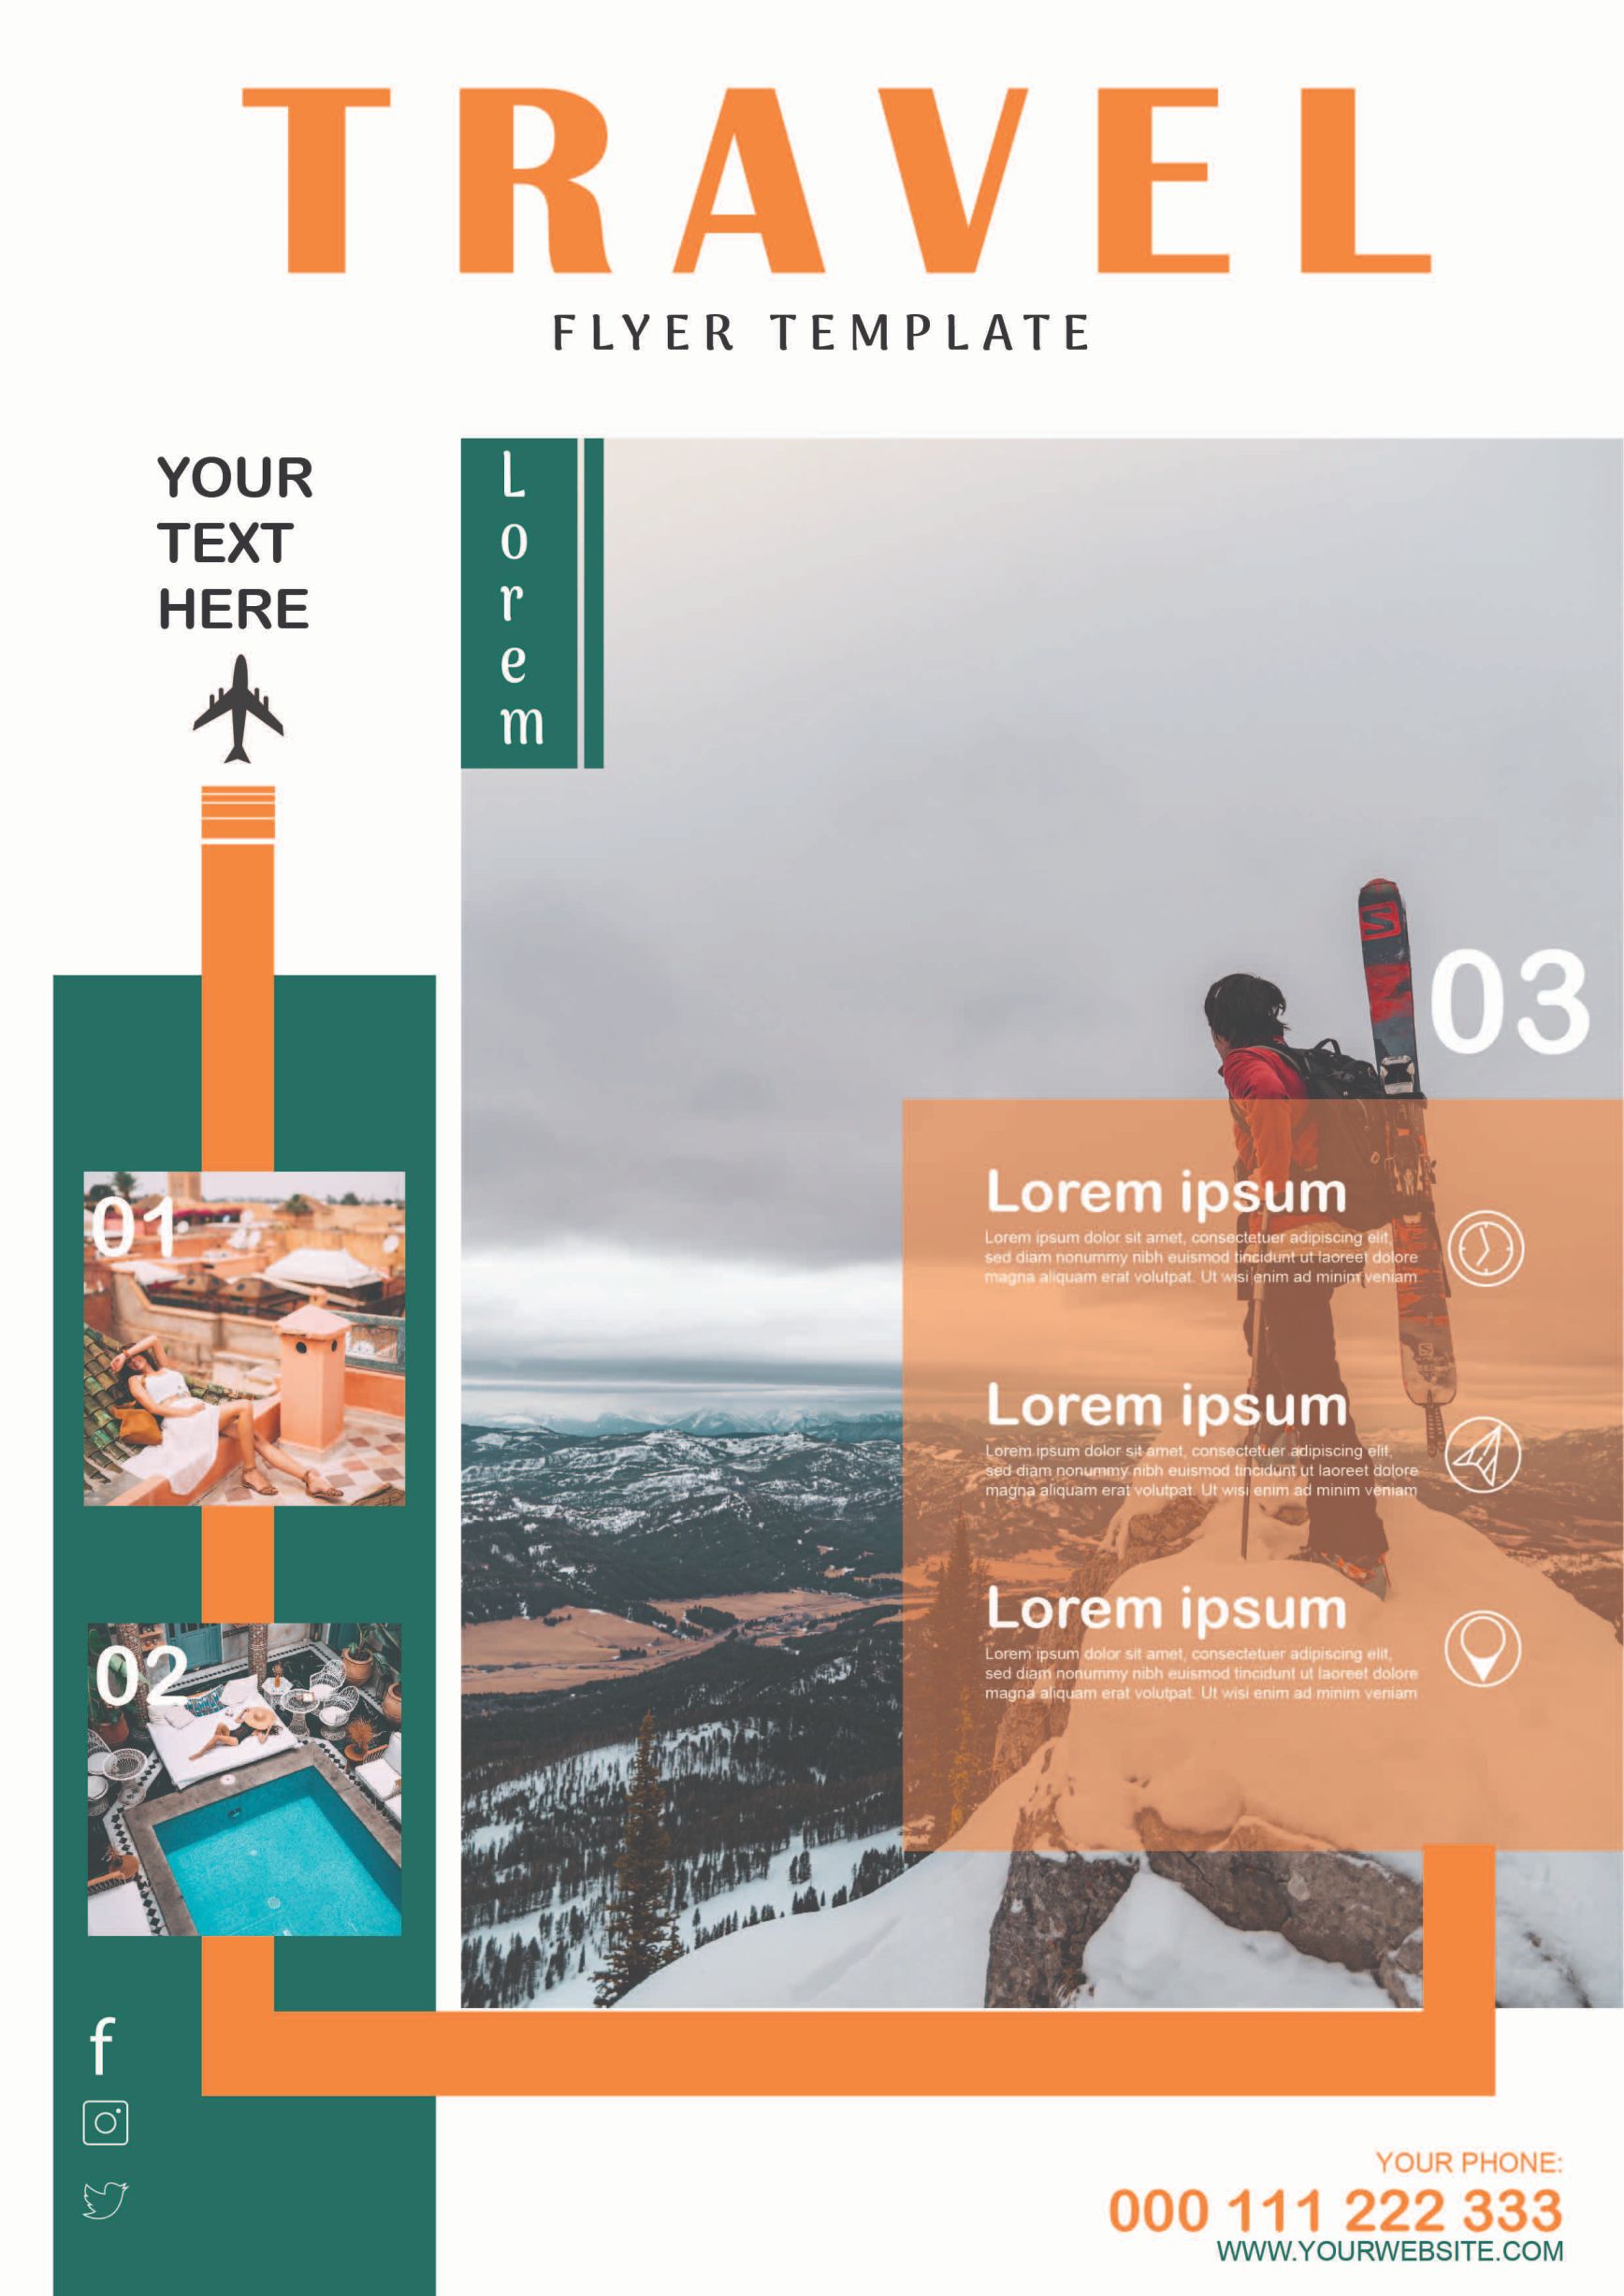 Travel brochure with a skier on top of a mountain.